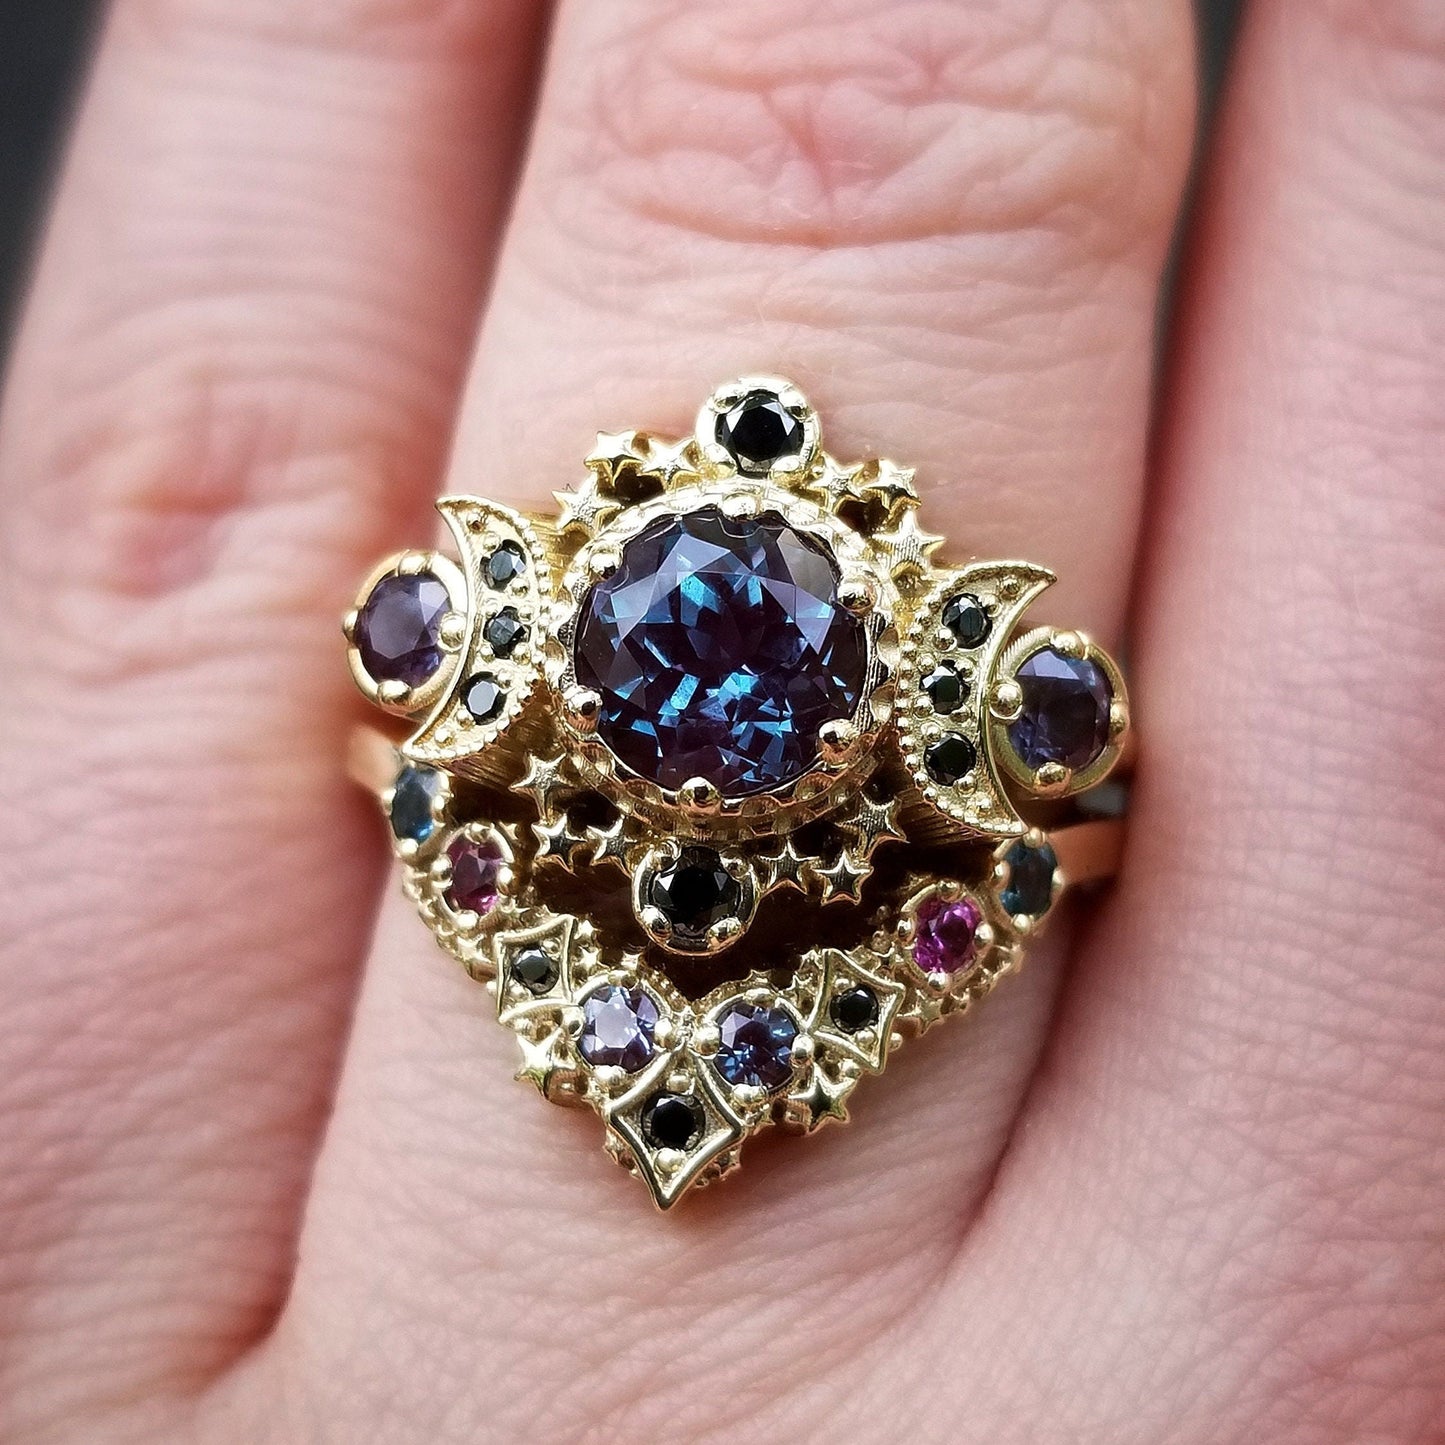 Deep Space Chatham Alexandrite and Black Diamond Cosmos Moon and Star Engagement Ring Set with Nebula Stardust Chevron Wedding Band